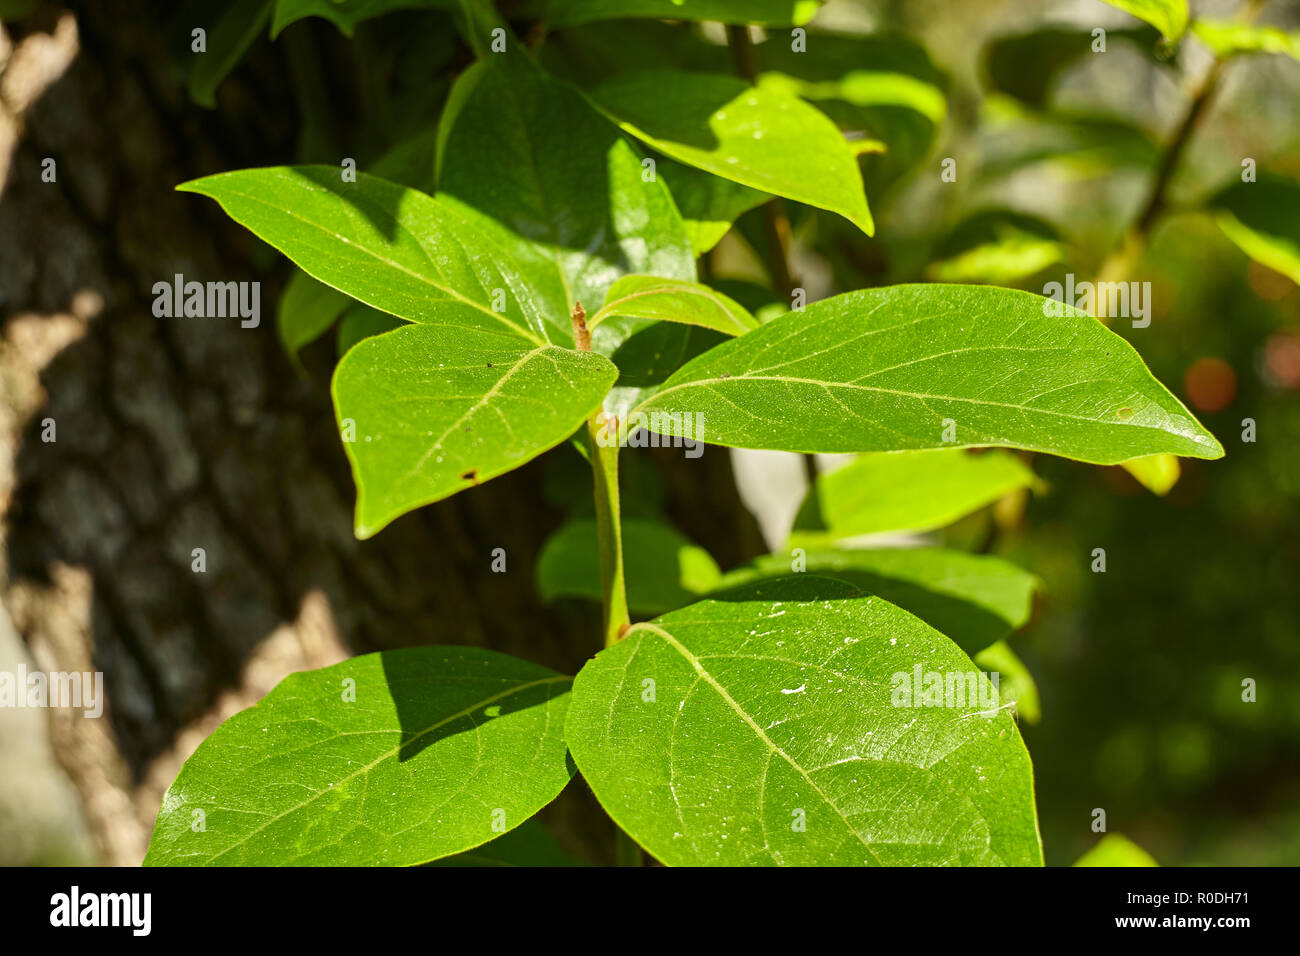 Detail of some leaves of the caco tree, the details of the leaf itself with  its veins are clearly visible Stock Photo - Alamy